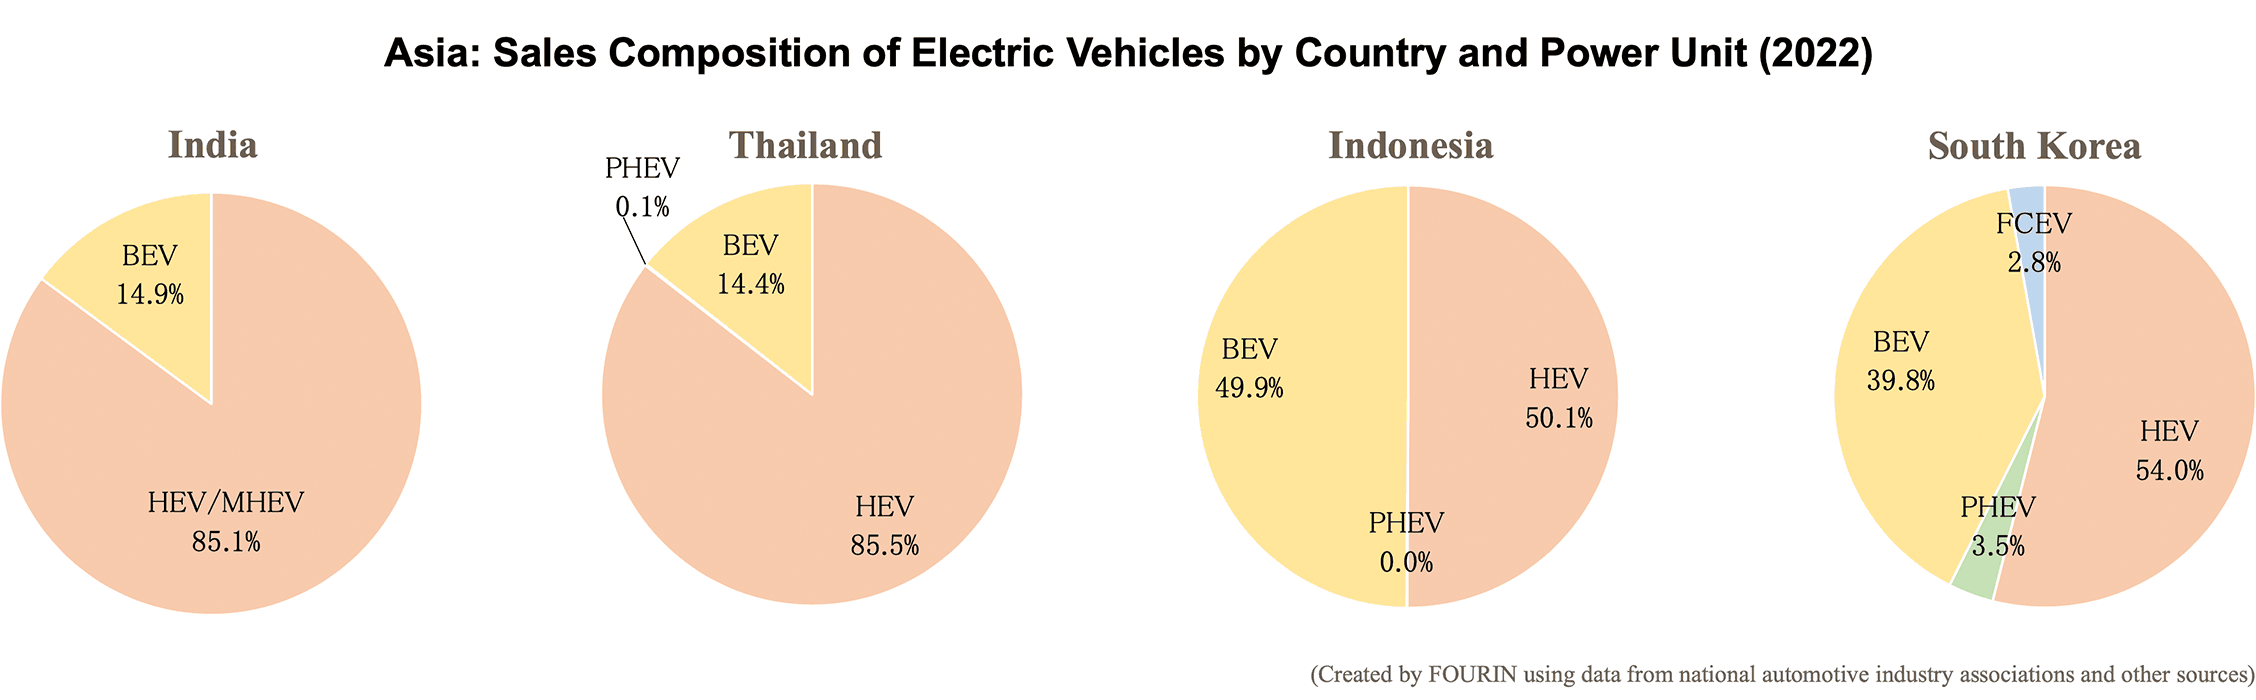 Pie graphs: Asia: Sales Composition of Electric Vehicles by Country and Power Unit (2022) - India, Thailand, Indonesia, South Korea